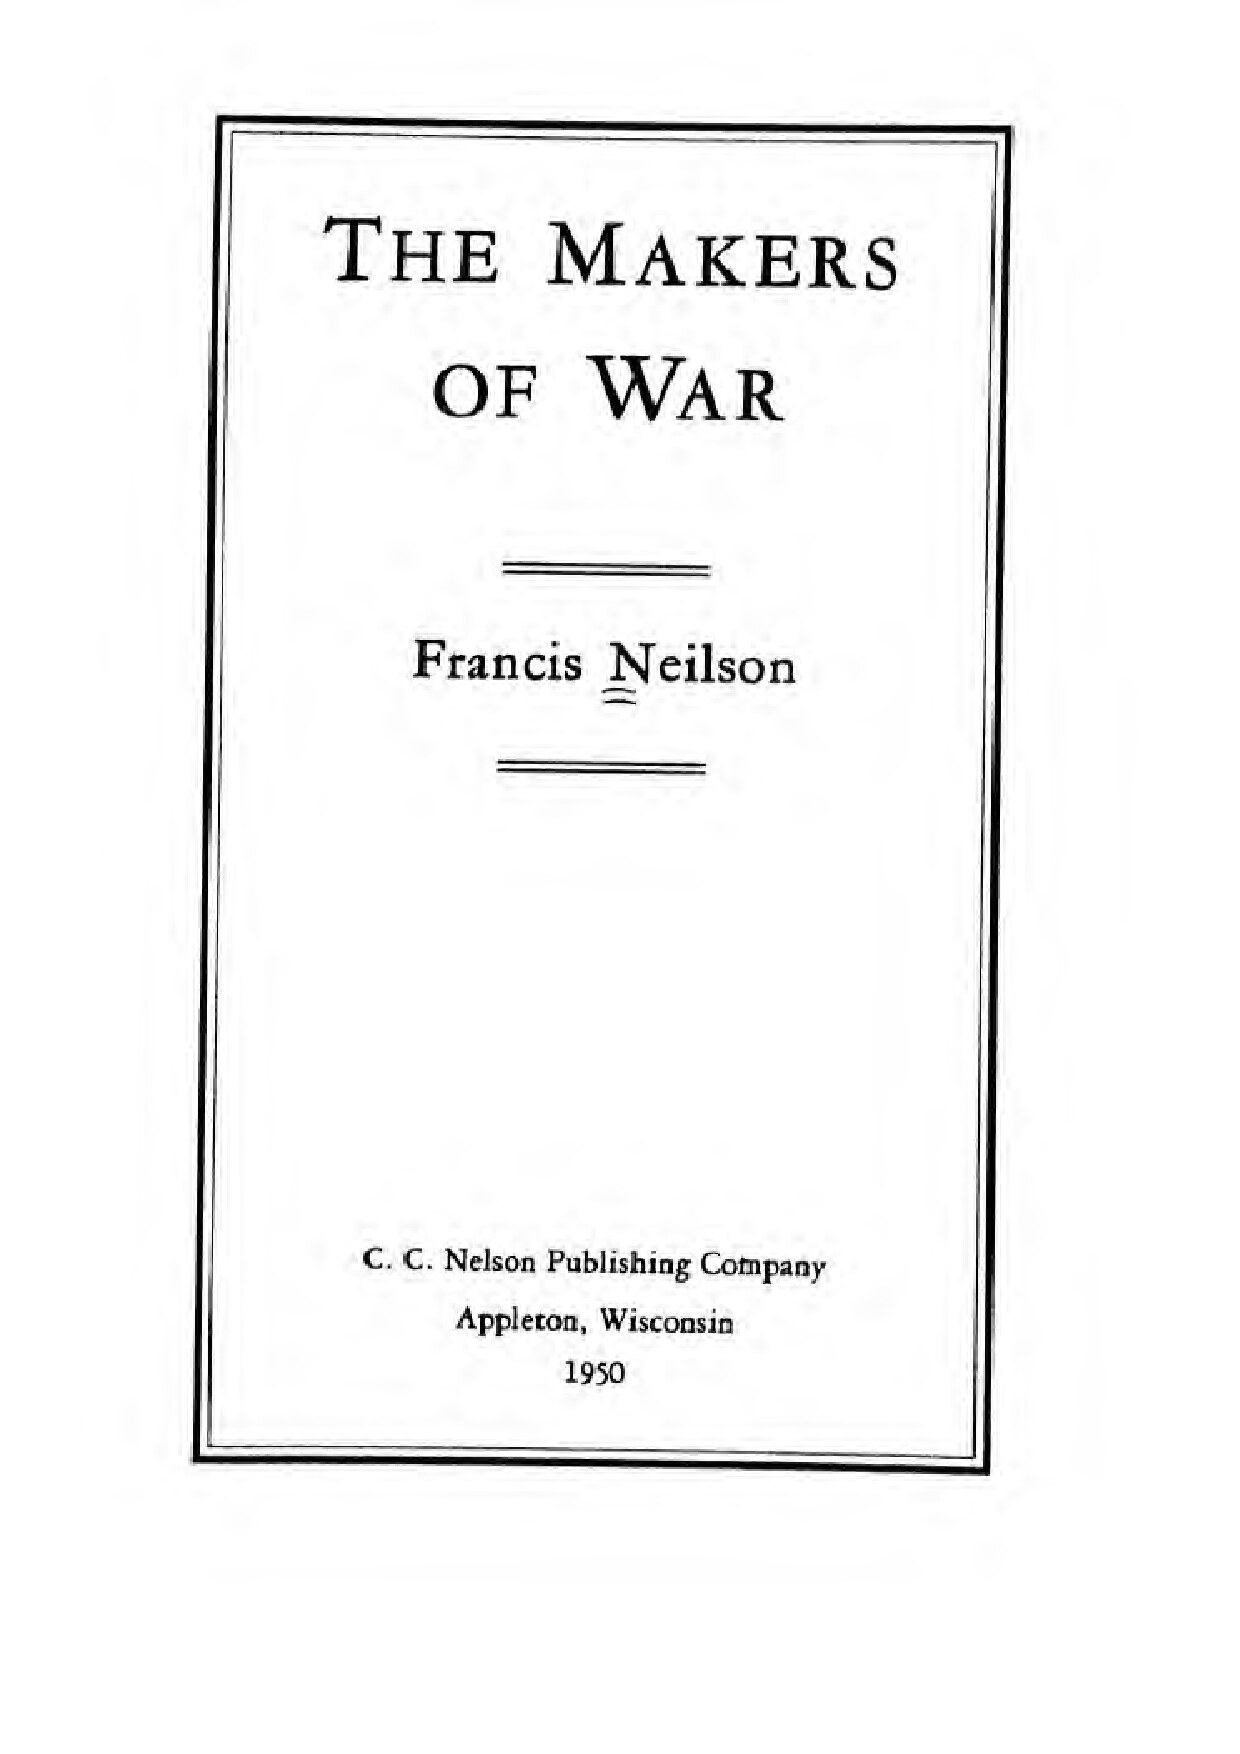 Francis Neilson - The Makers Of War ( 1950)